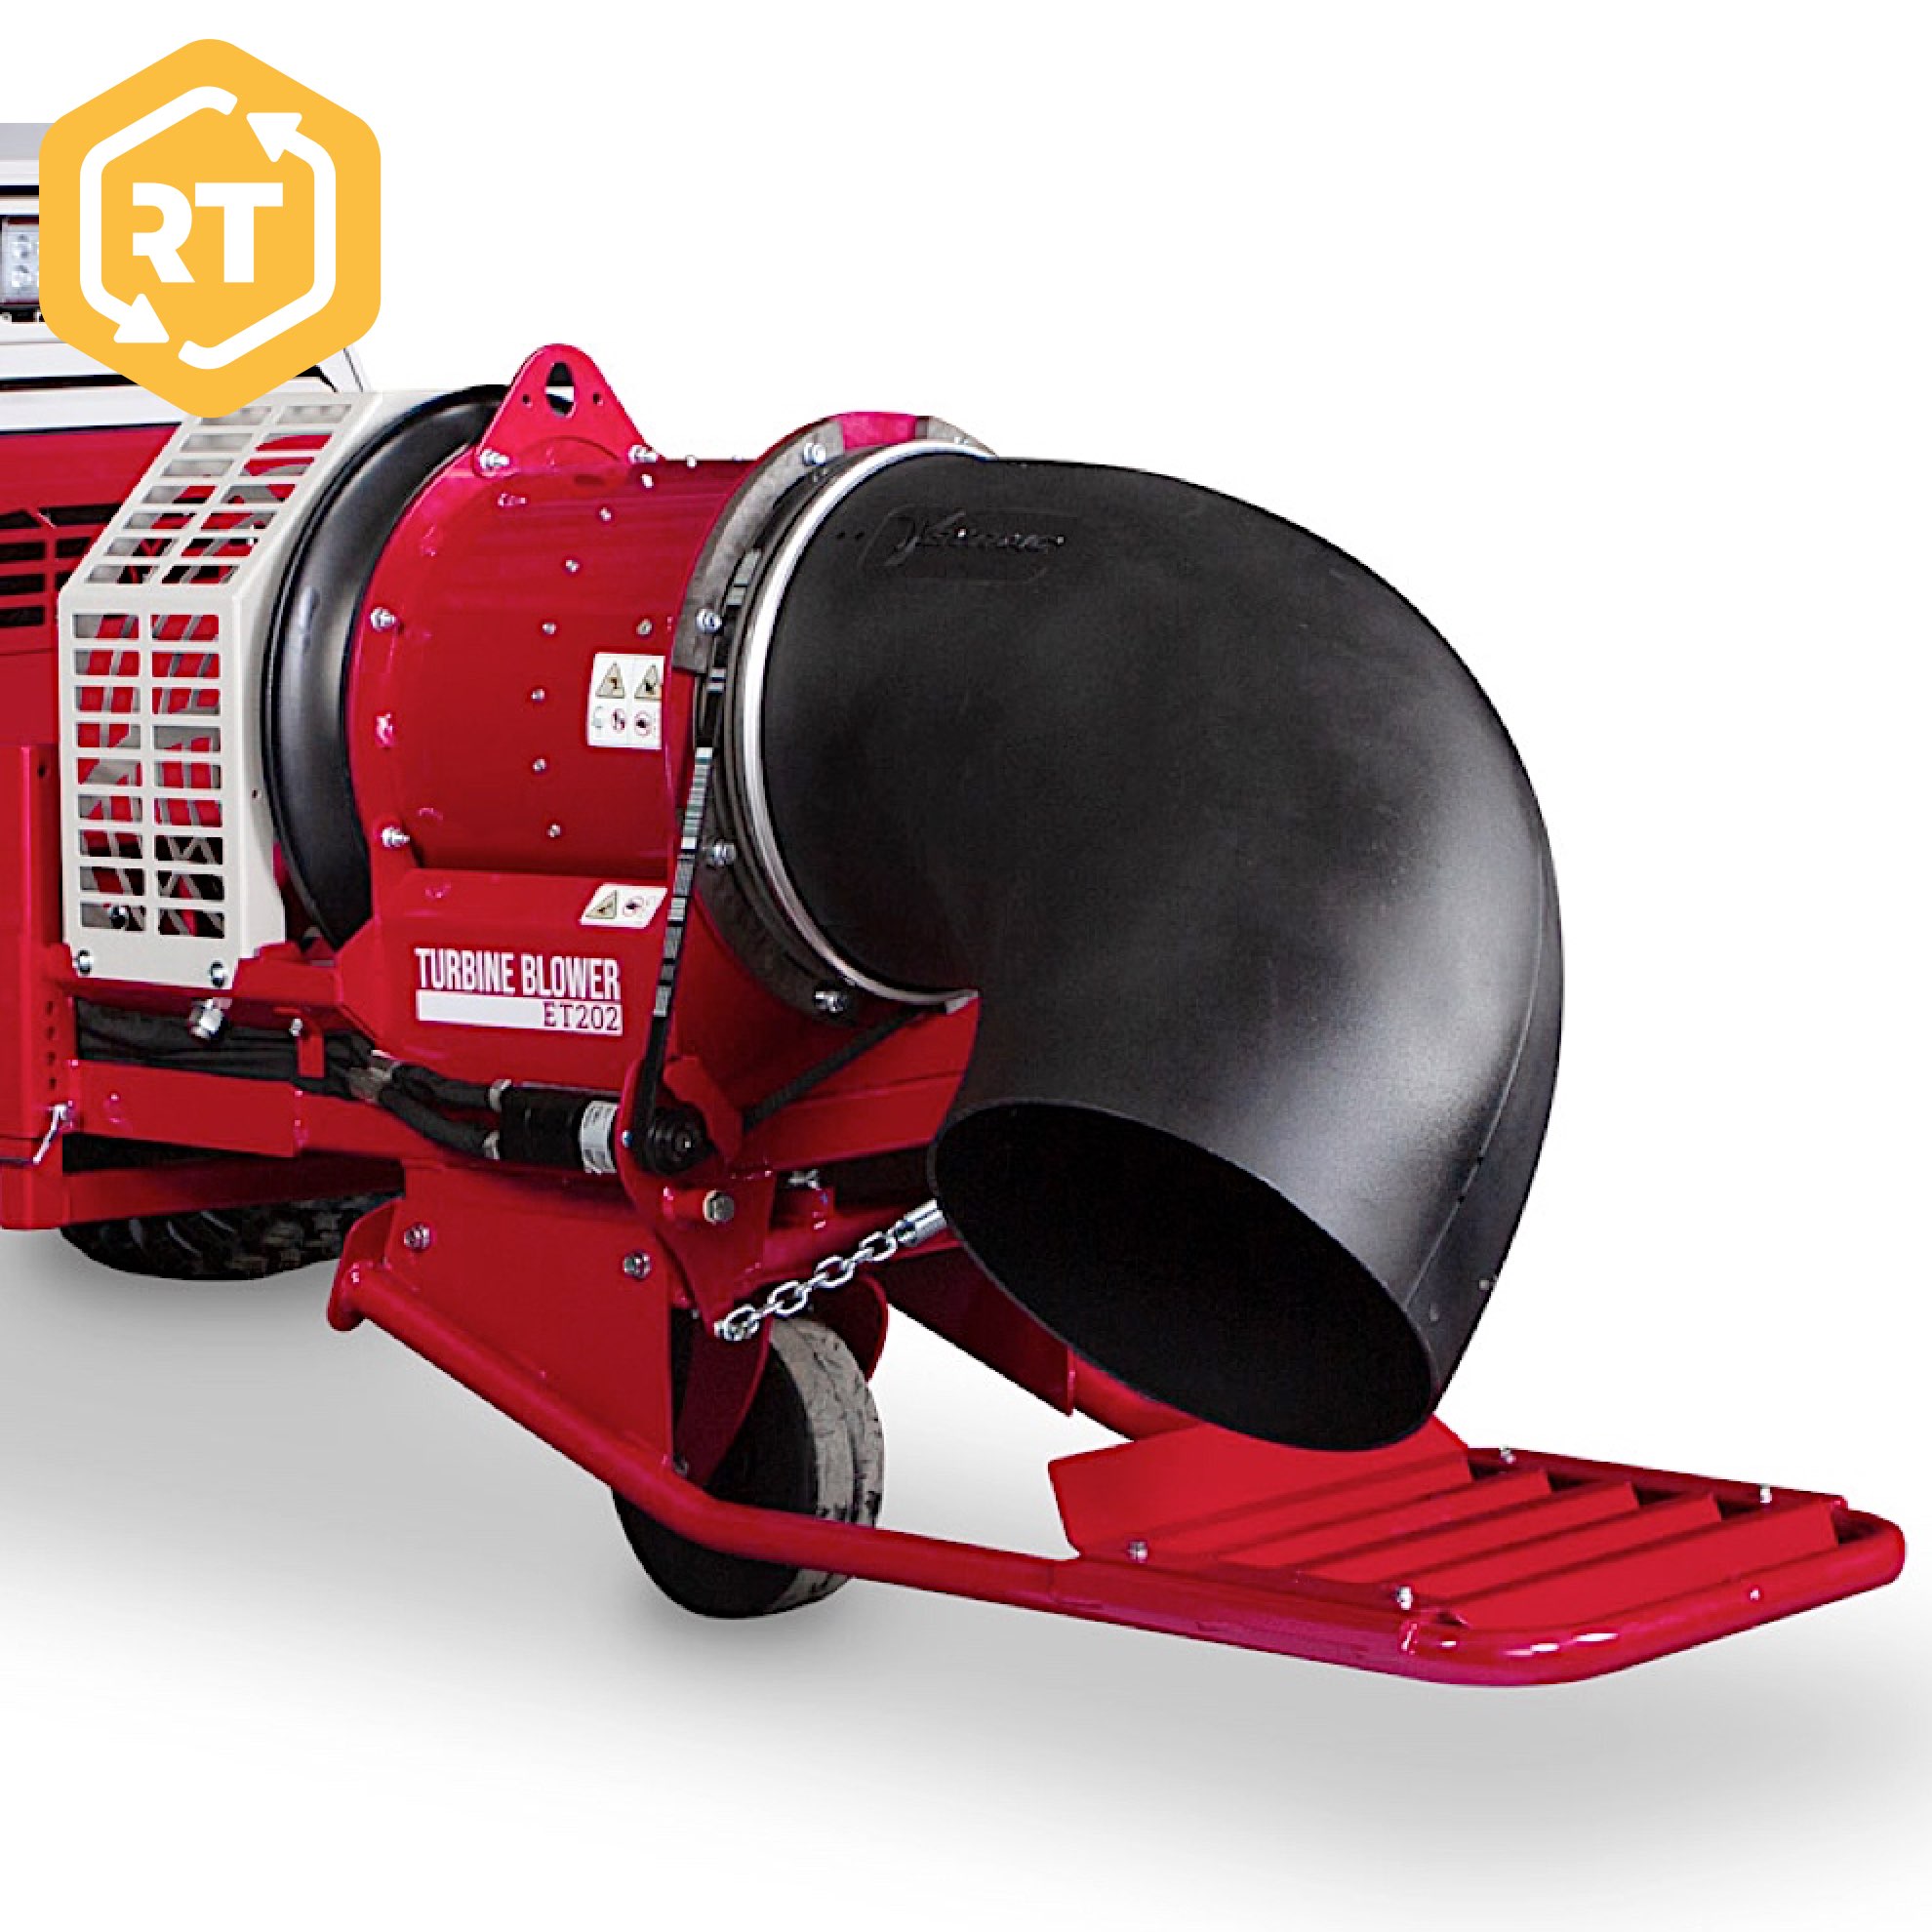 Ventrac ET202 Turbine Blower | Available for Hire!